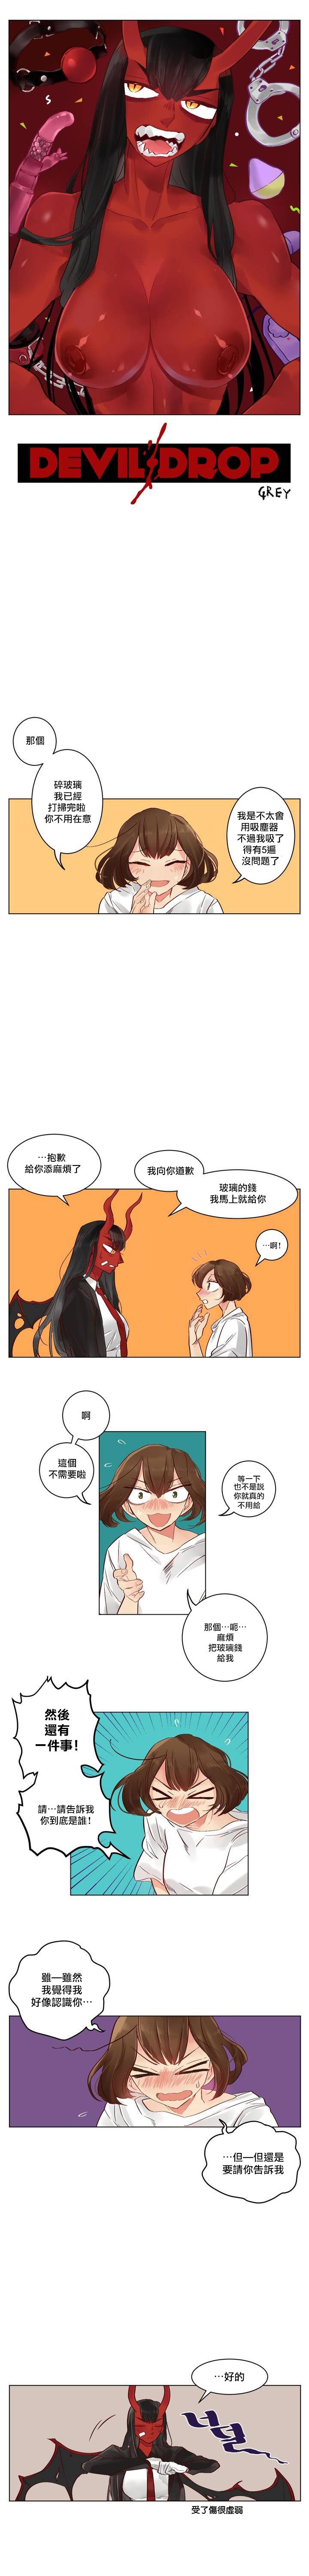 Doggystyle Devil Drop | 天降惡魔 Game - Page 8